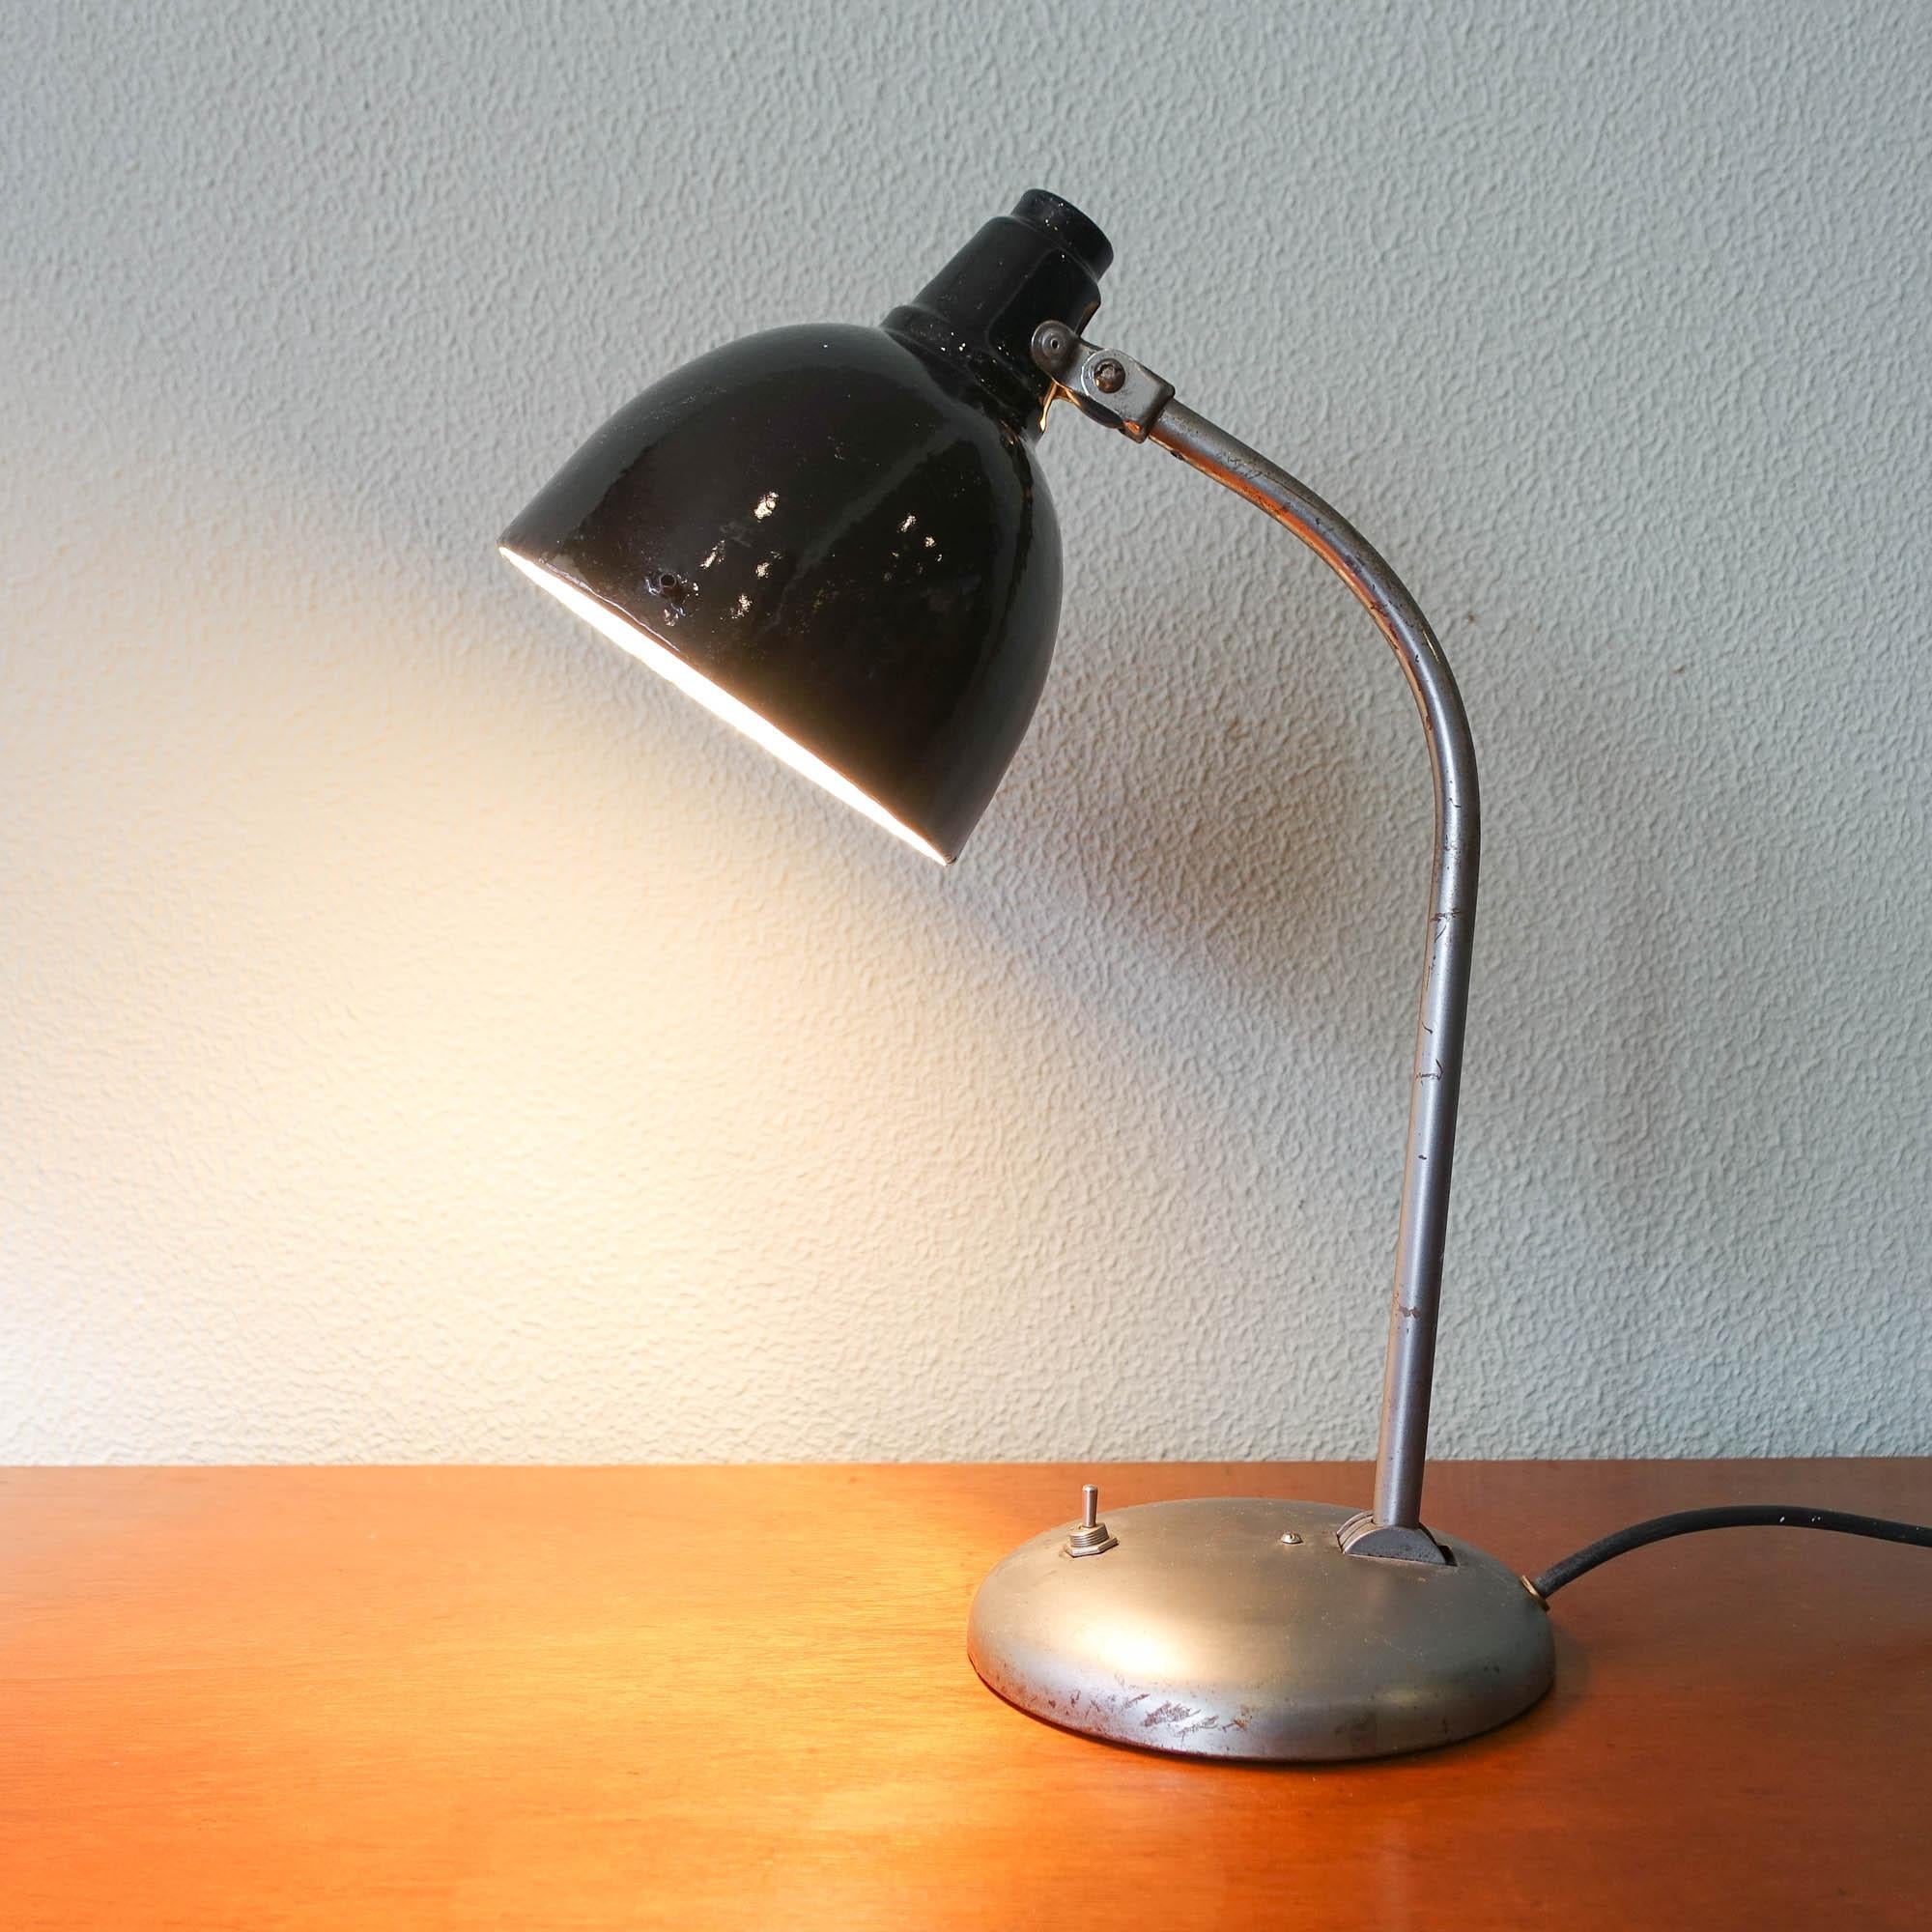 This desk lamp was design and manufactured by Hala, in the Netherlands, during the 1930's. It is made of high quality grey metal base with a black lacquered shade. The arm allows the hood of the lamp and the direction of the light to be adjusted in